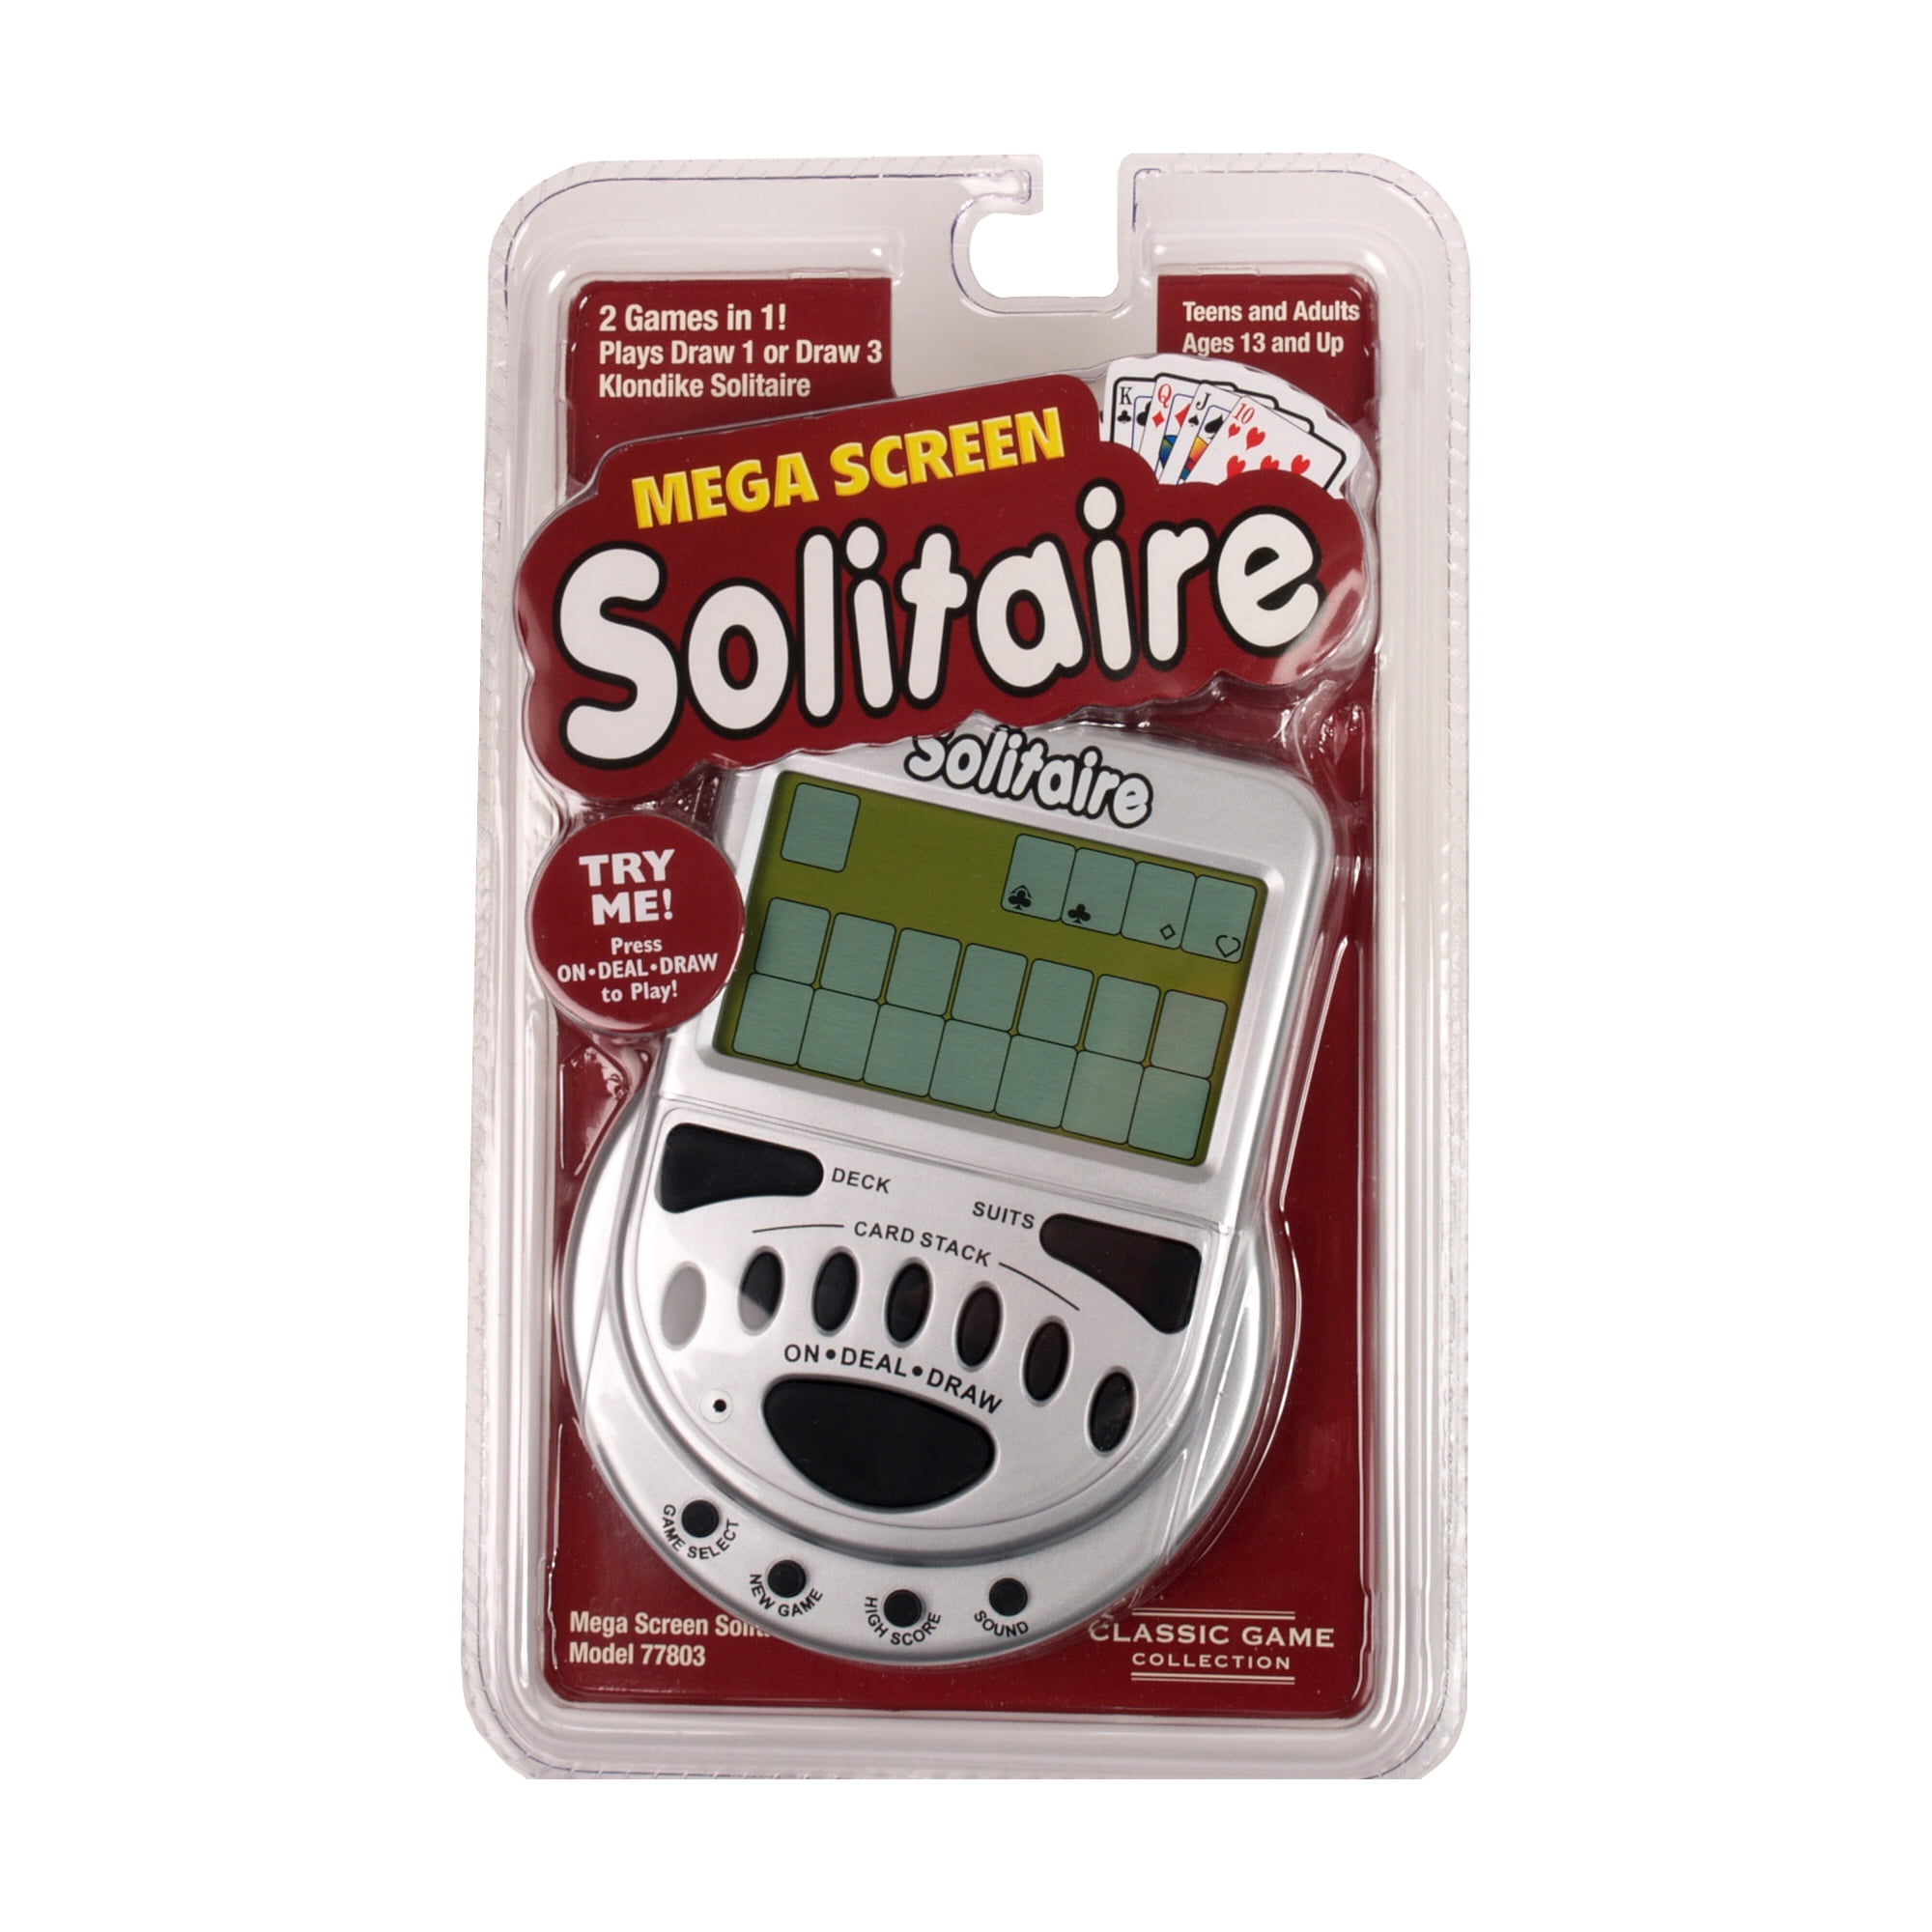 4.2 X 0.8 X 6 Inches ; 12 Ounces Toy With Large Game Mega Screen Solitaire